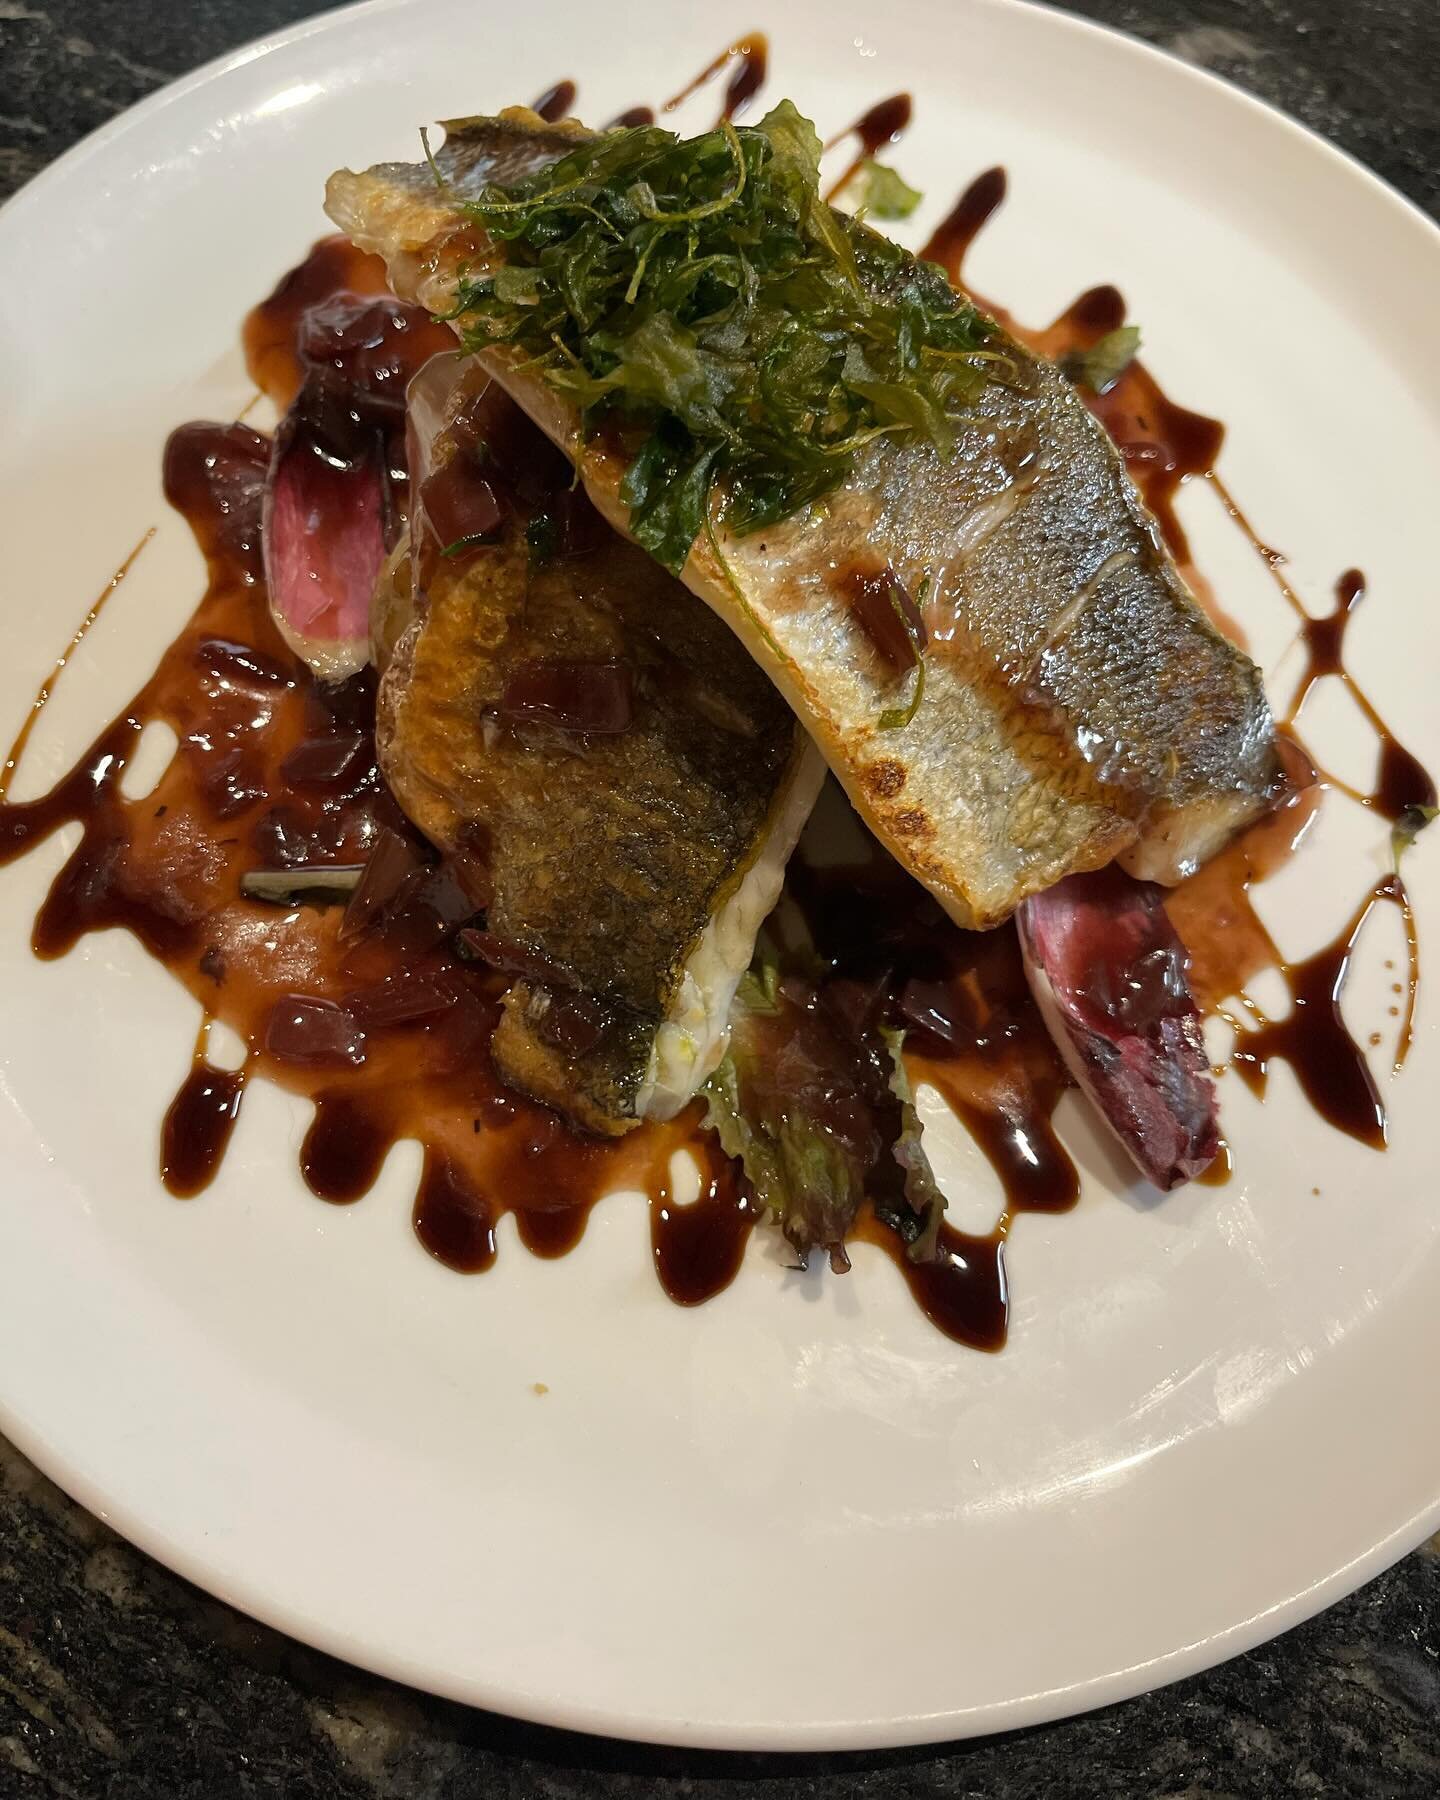 Some delicious dishes from our Christmas menu ✨🌲

Seabass, smoked bacon &amp; green beans &amp; red chicory, new potatoes &amp; red wine sauce 

Braised pork belly, poached pear &amp; cider sauce, aniseed red cabbage &amp; colcannon potato 

Buttern